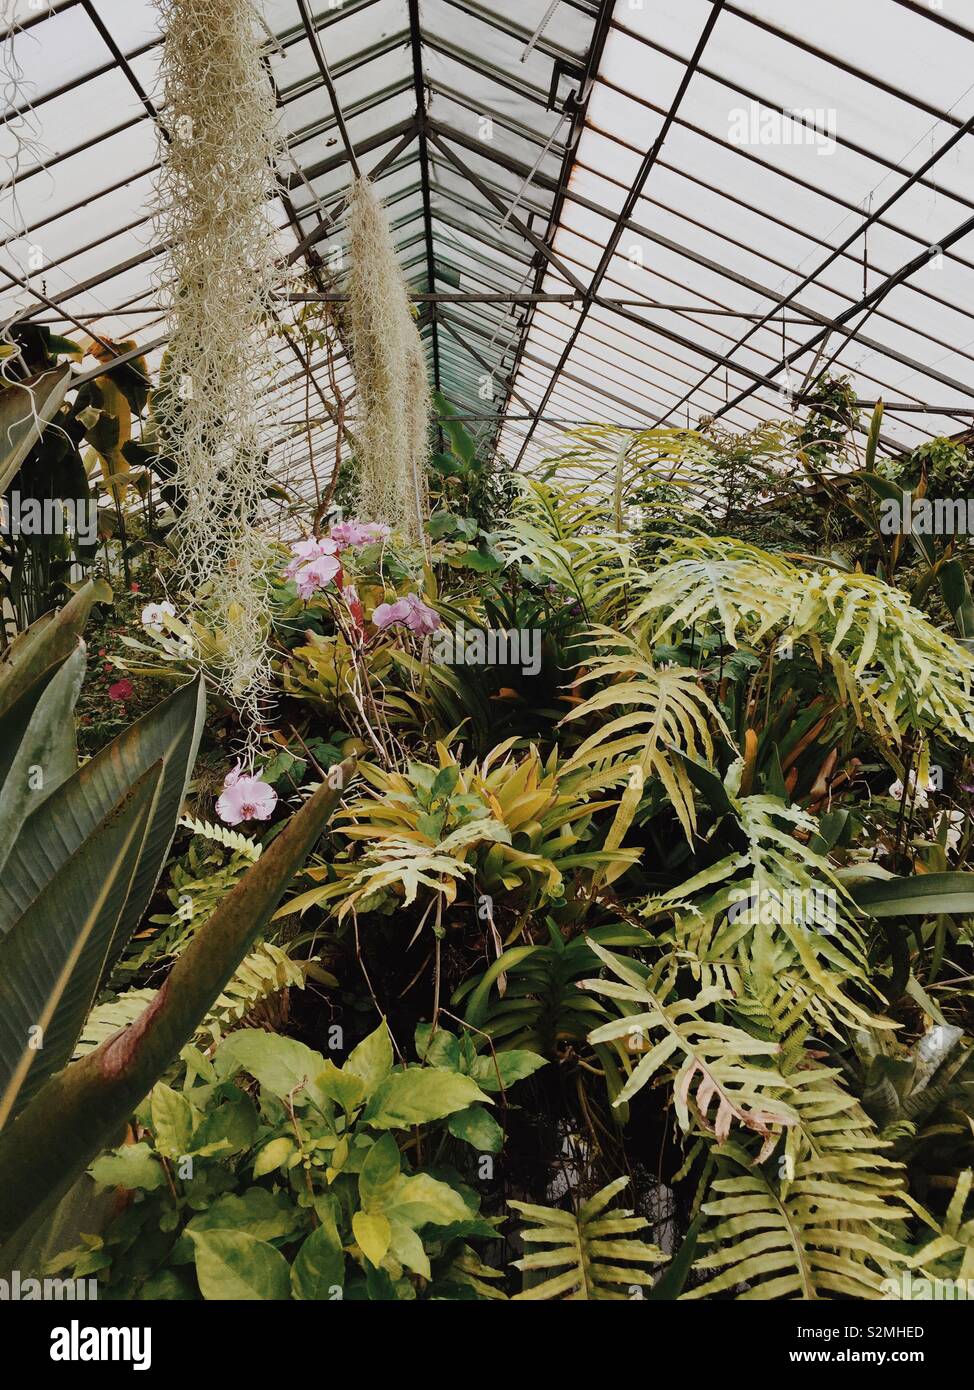 Swathe of fauna in giant green house Stock Photo